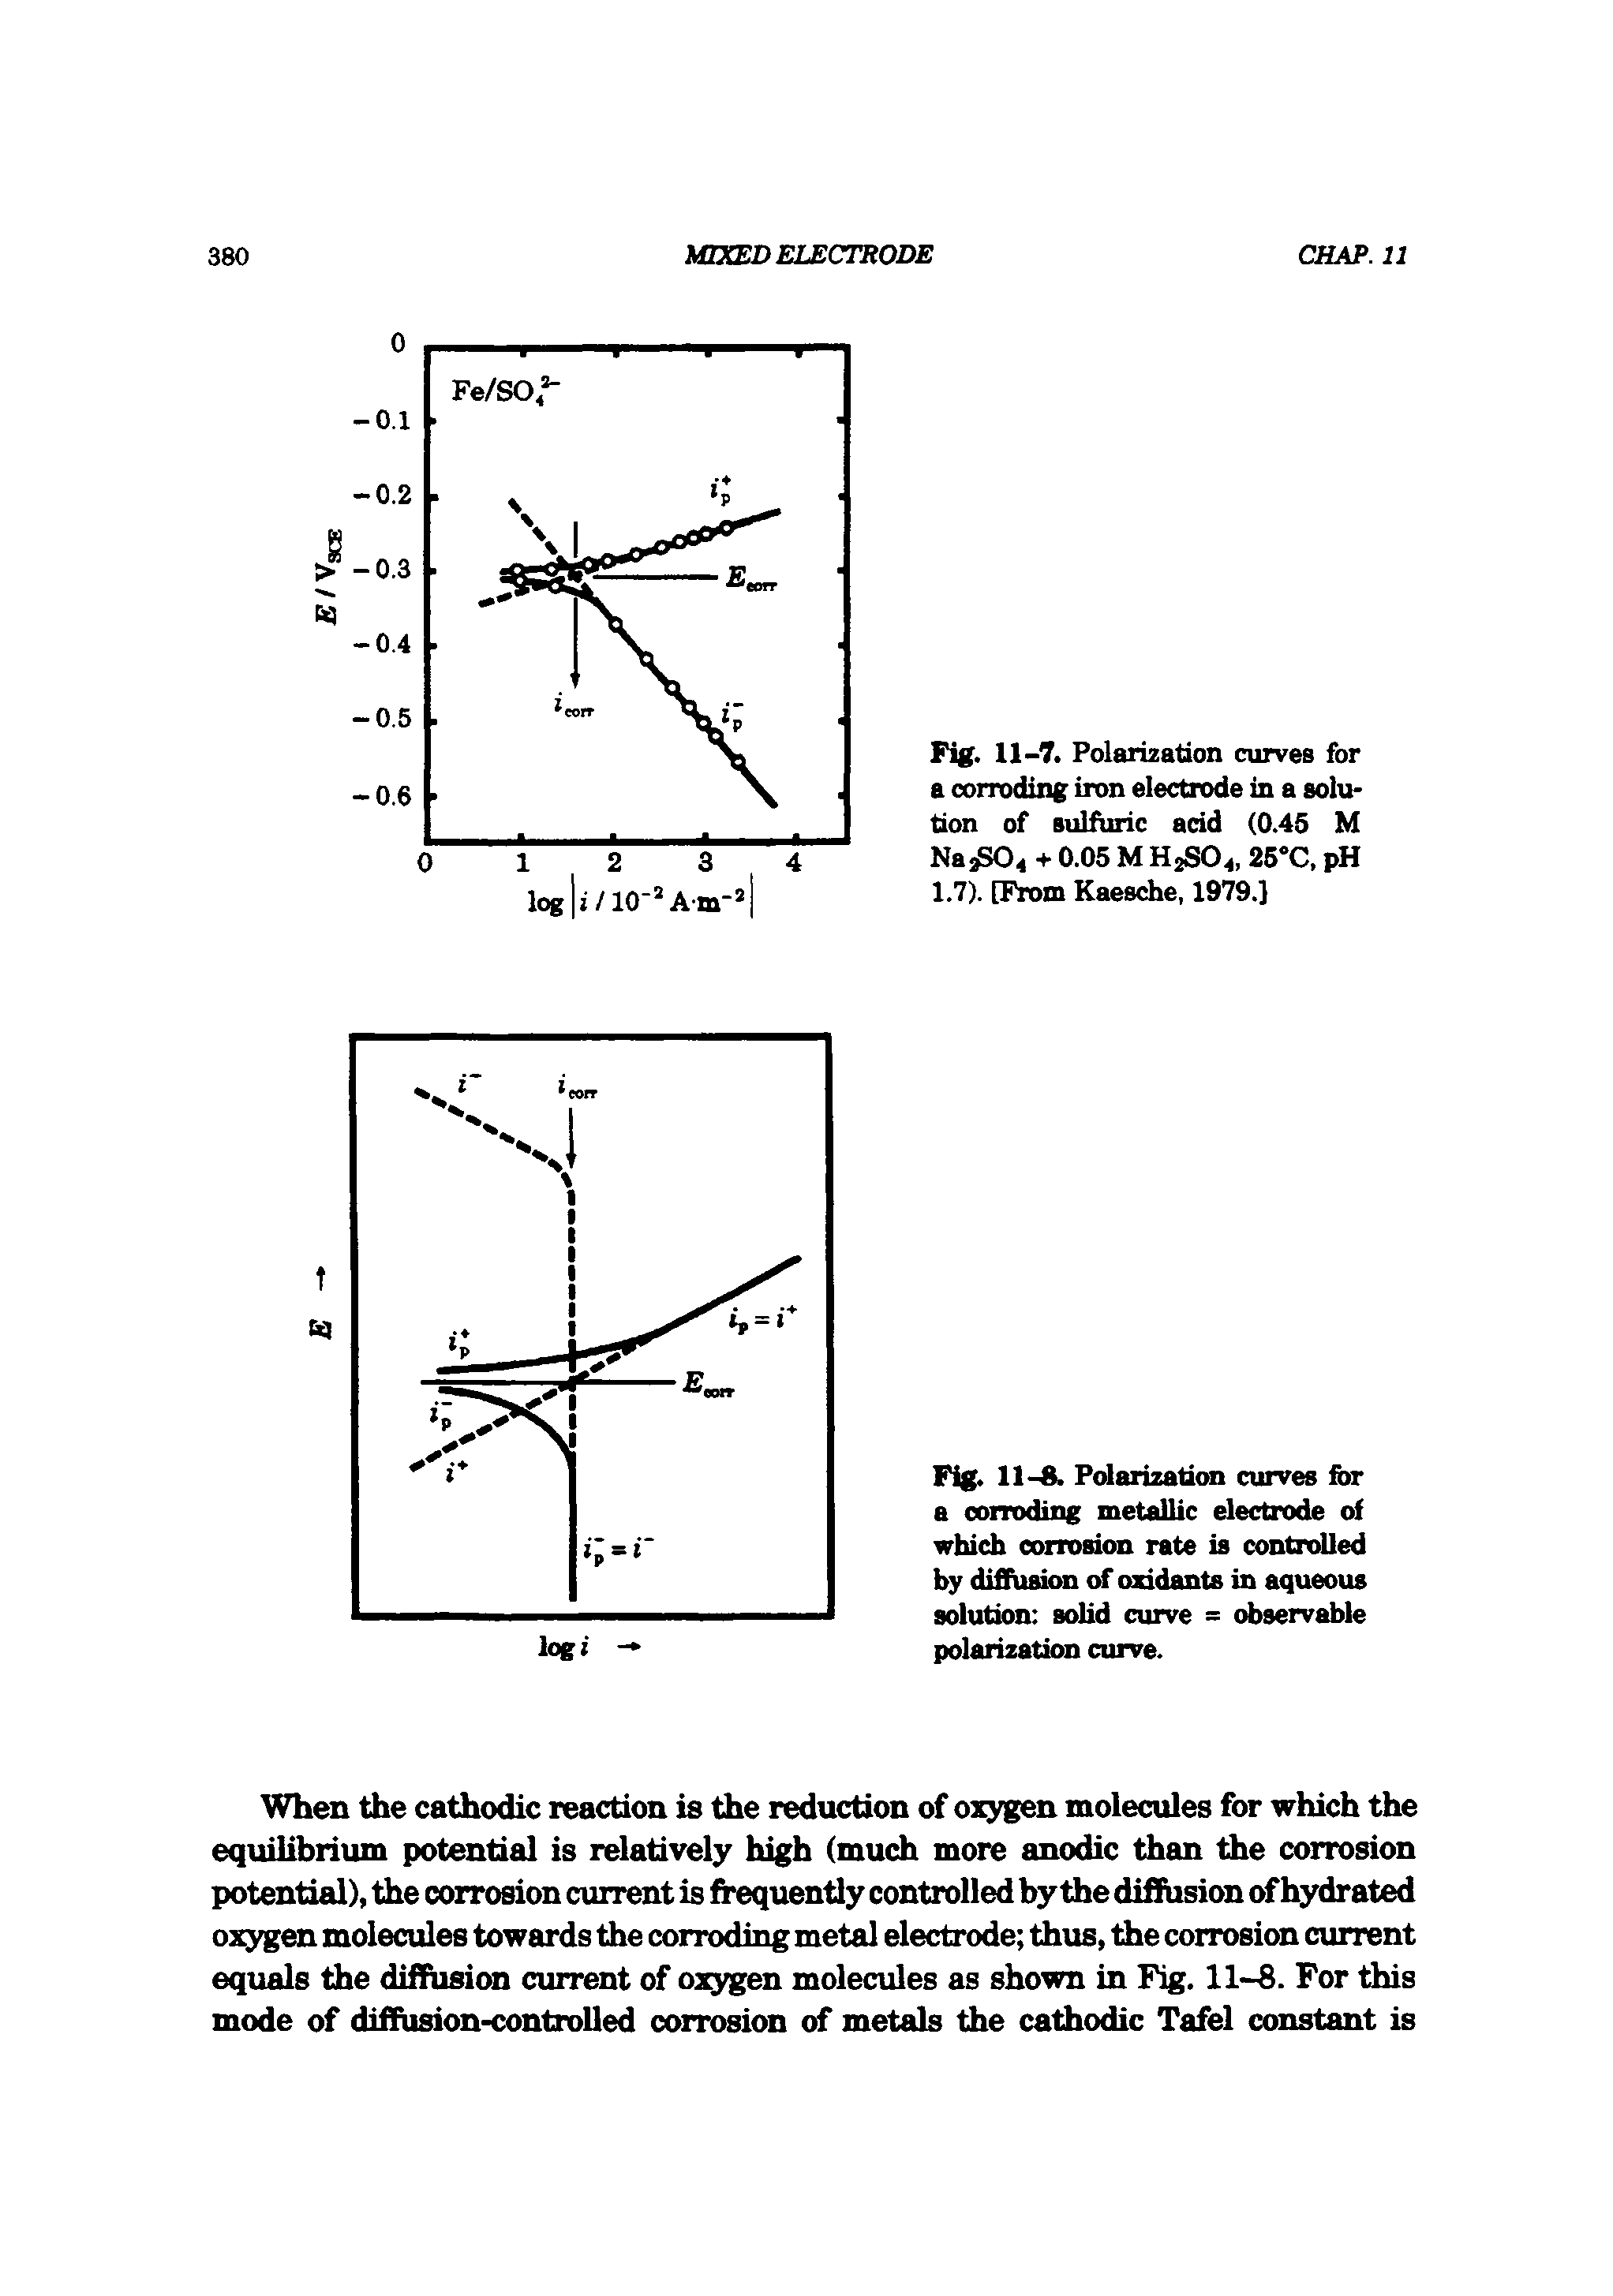 Fig. 11-8. Polarization curves for a corroding metallic electrode of which corrosion rate is controlled by diffusion of oxidants in aqueous solution solid curve = observable polarization curve.